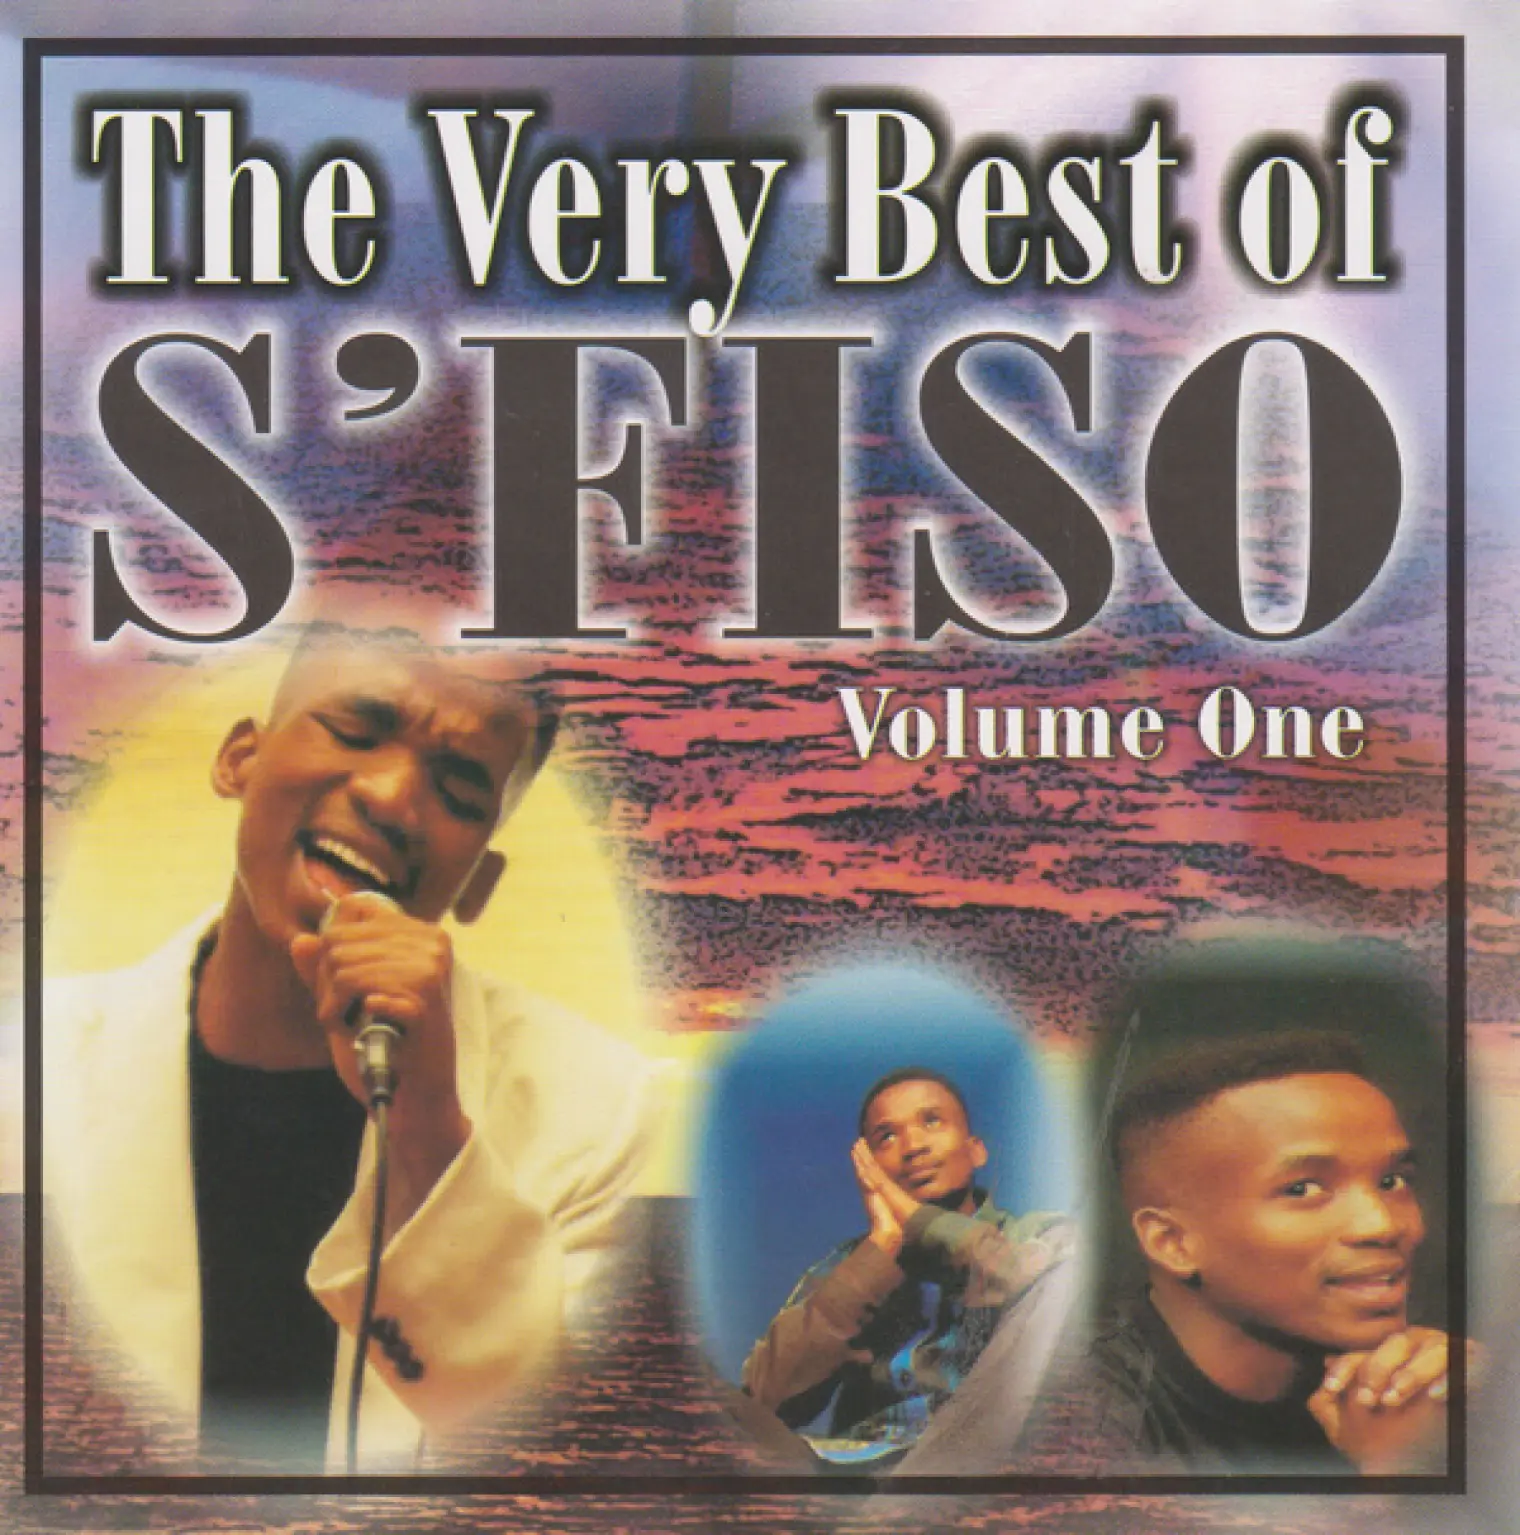 The Very Best of S'fiso, Vol. 1 -  S'fiso 